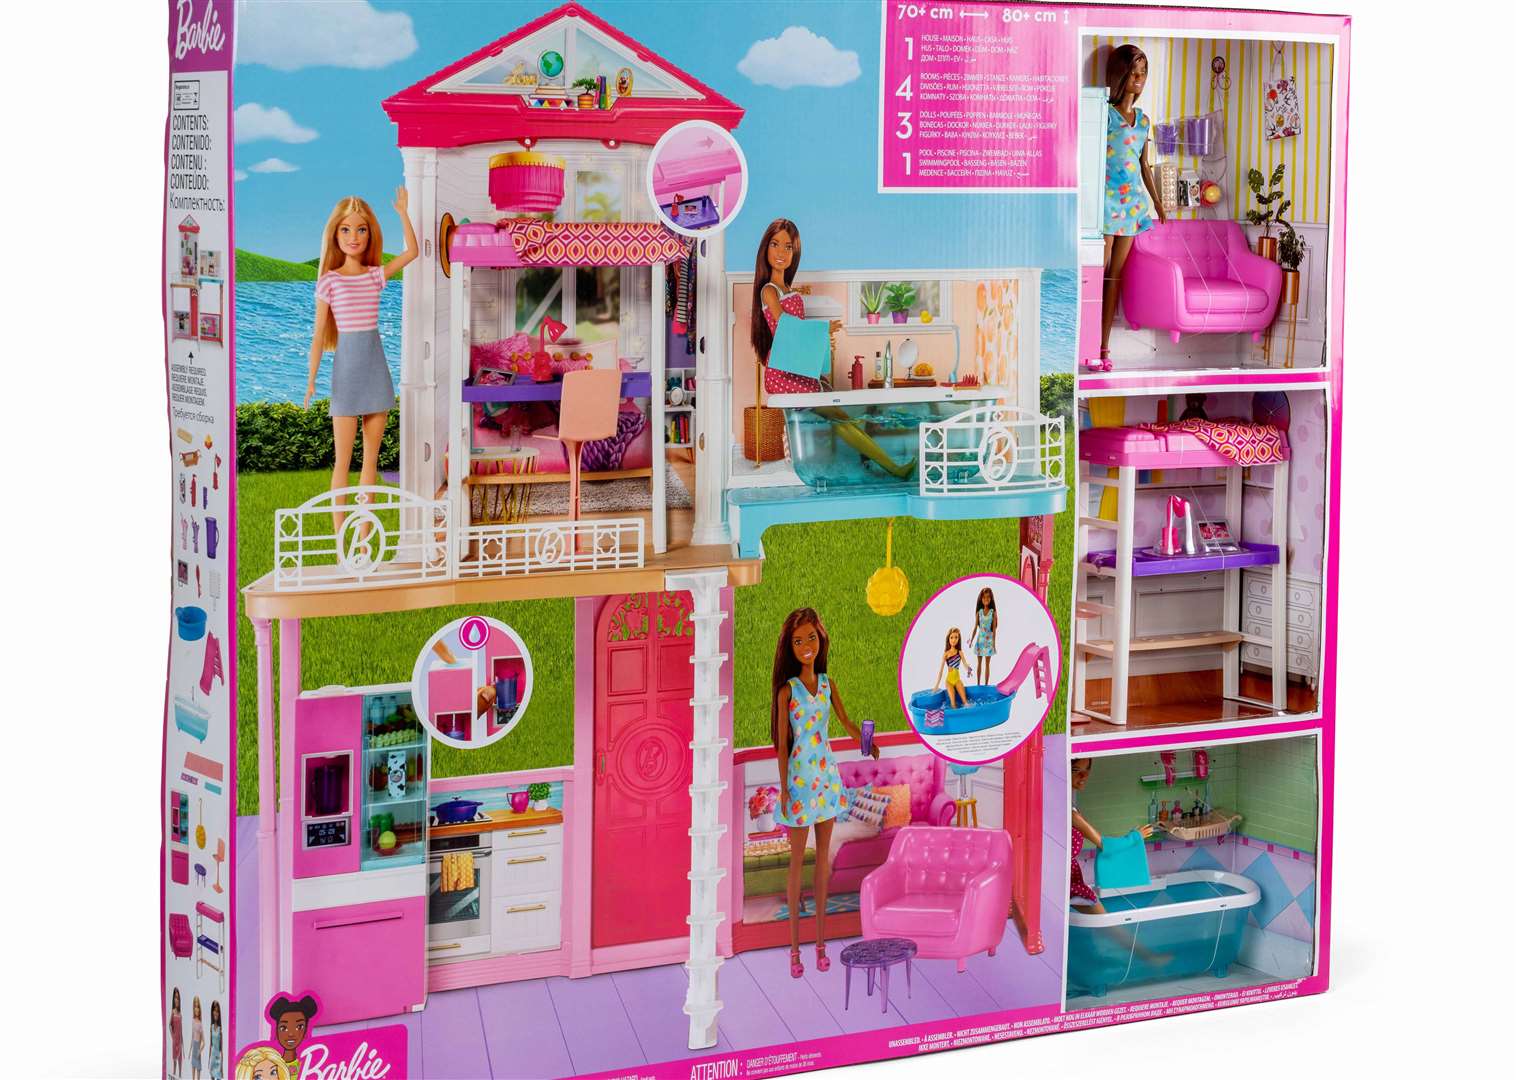 The Barbie house is the most expensive toy on the list. Image: Argos.